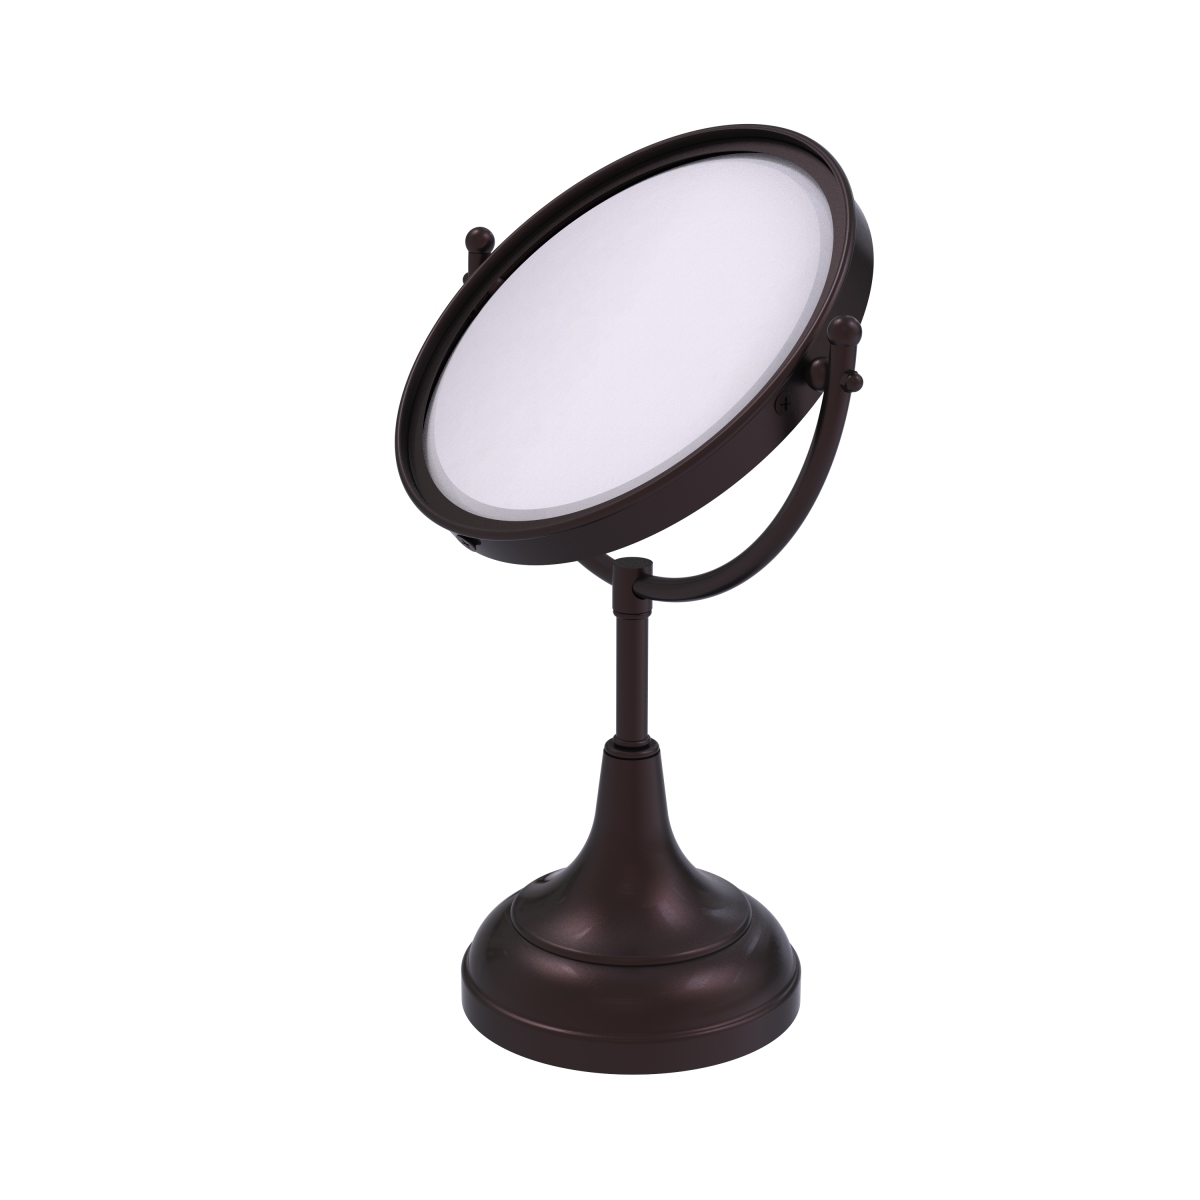 Dm-2-3x-abz Smooth Ring Style 8 In. Vanity Top Make-up Mirror 3x Magnification, Antique Bronze